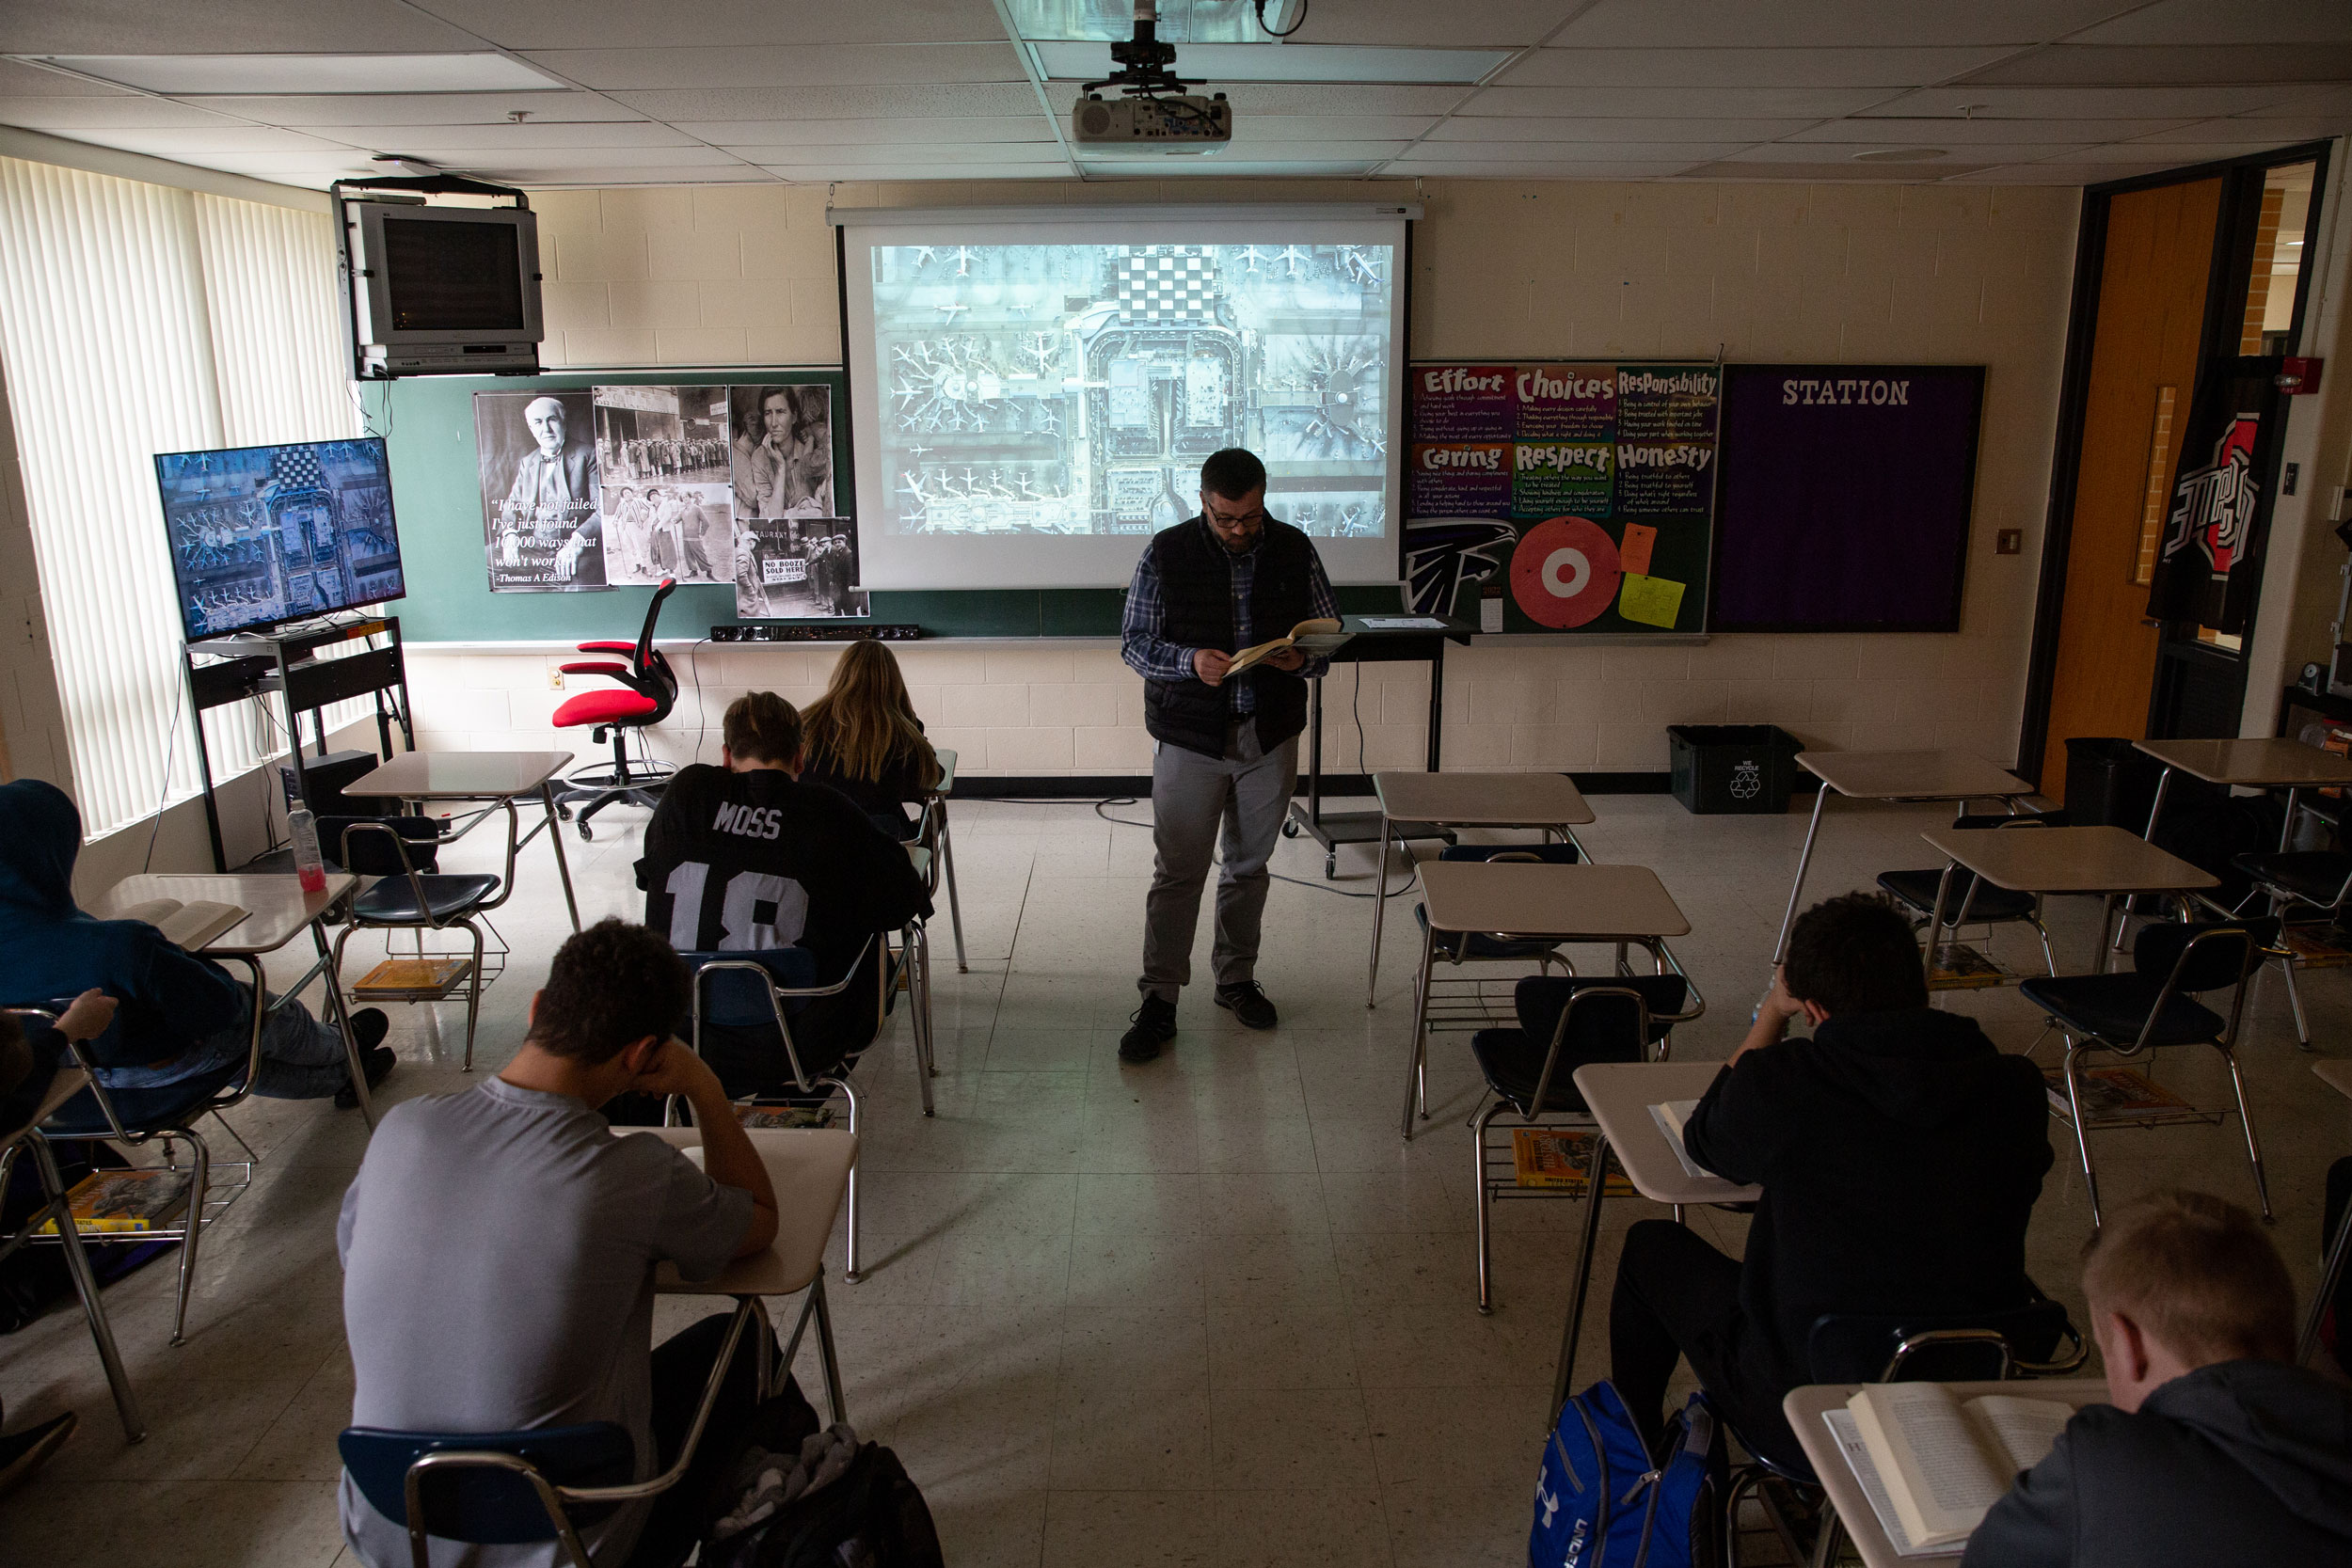 Thompson reads Hillbilly Elegy to the class as part of their course work.
Thompson says the class is only a few chapters into the book, but he
has seen students draw connections from the book to their own lives in
rural Ohio. (Jesse Jarrold-Grapes)